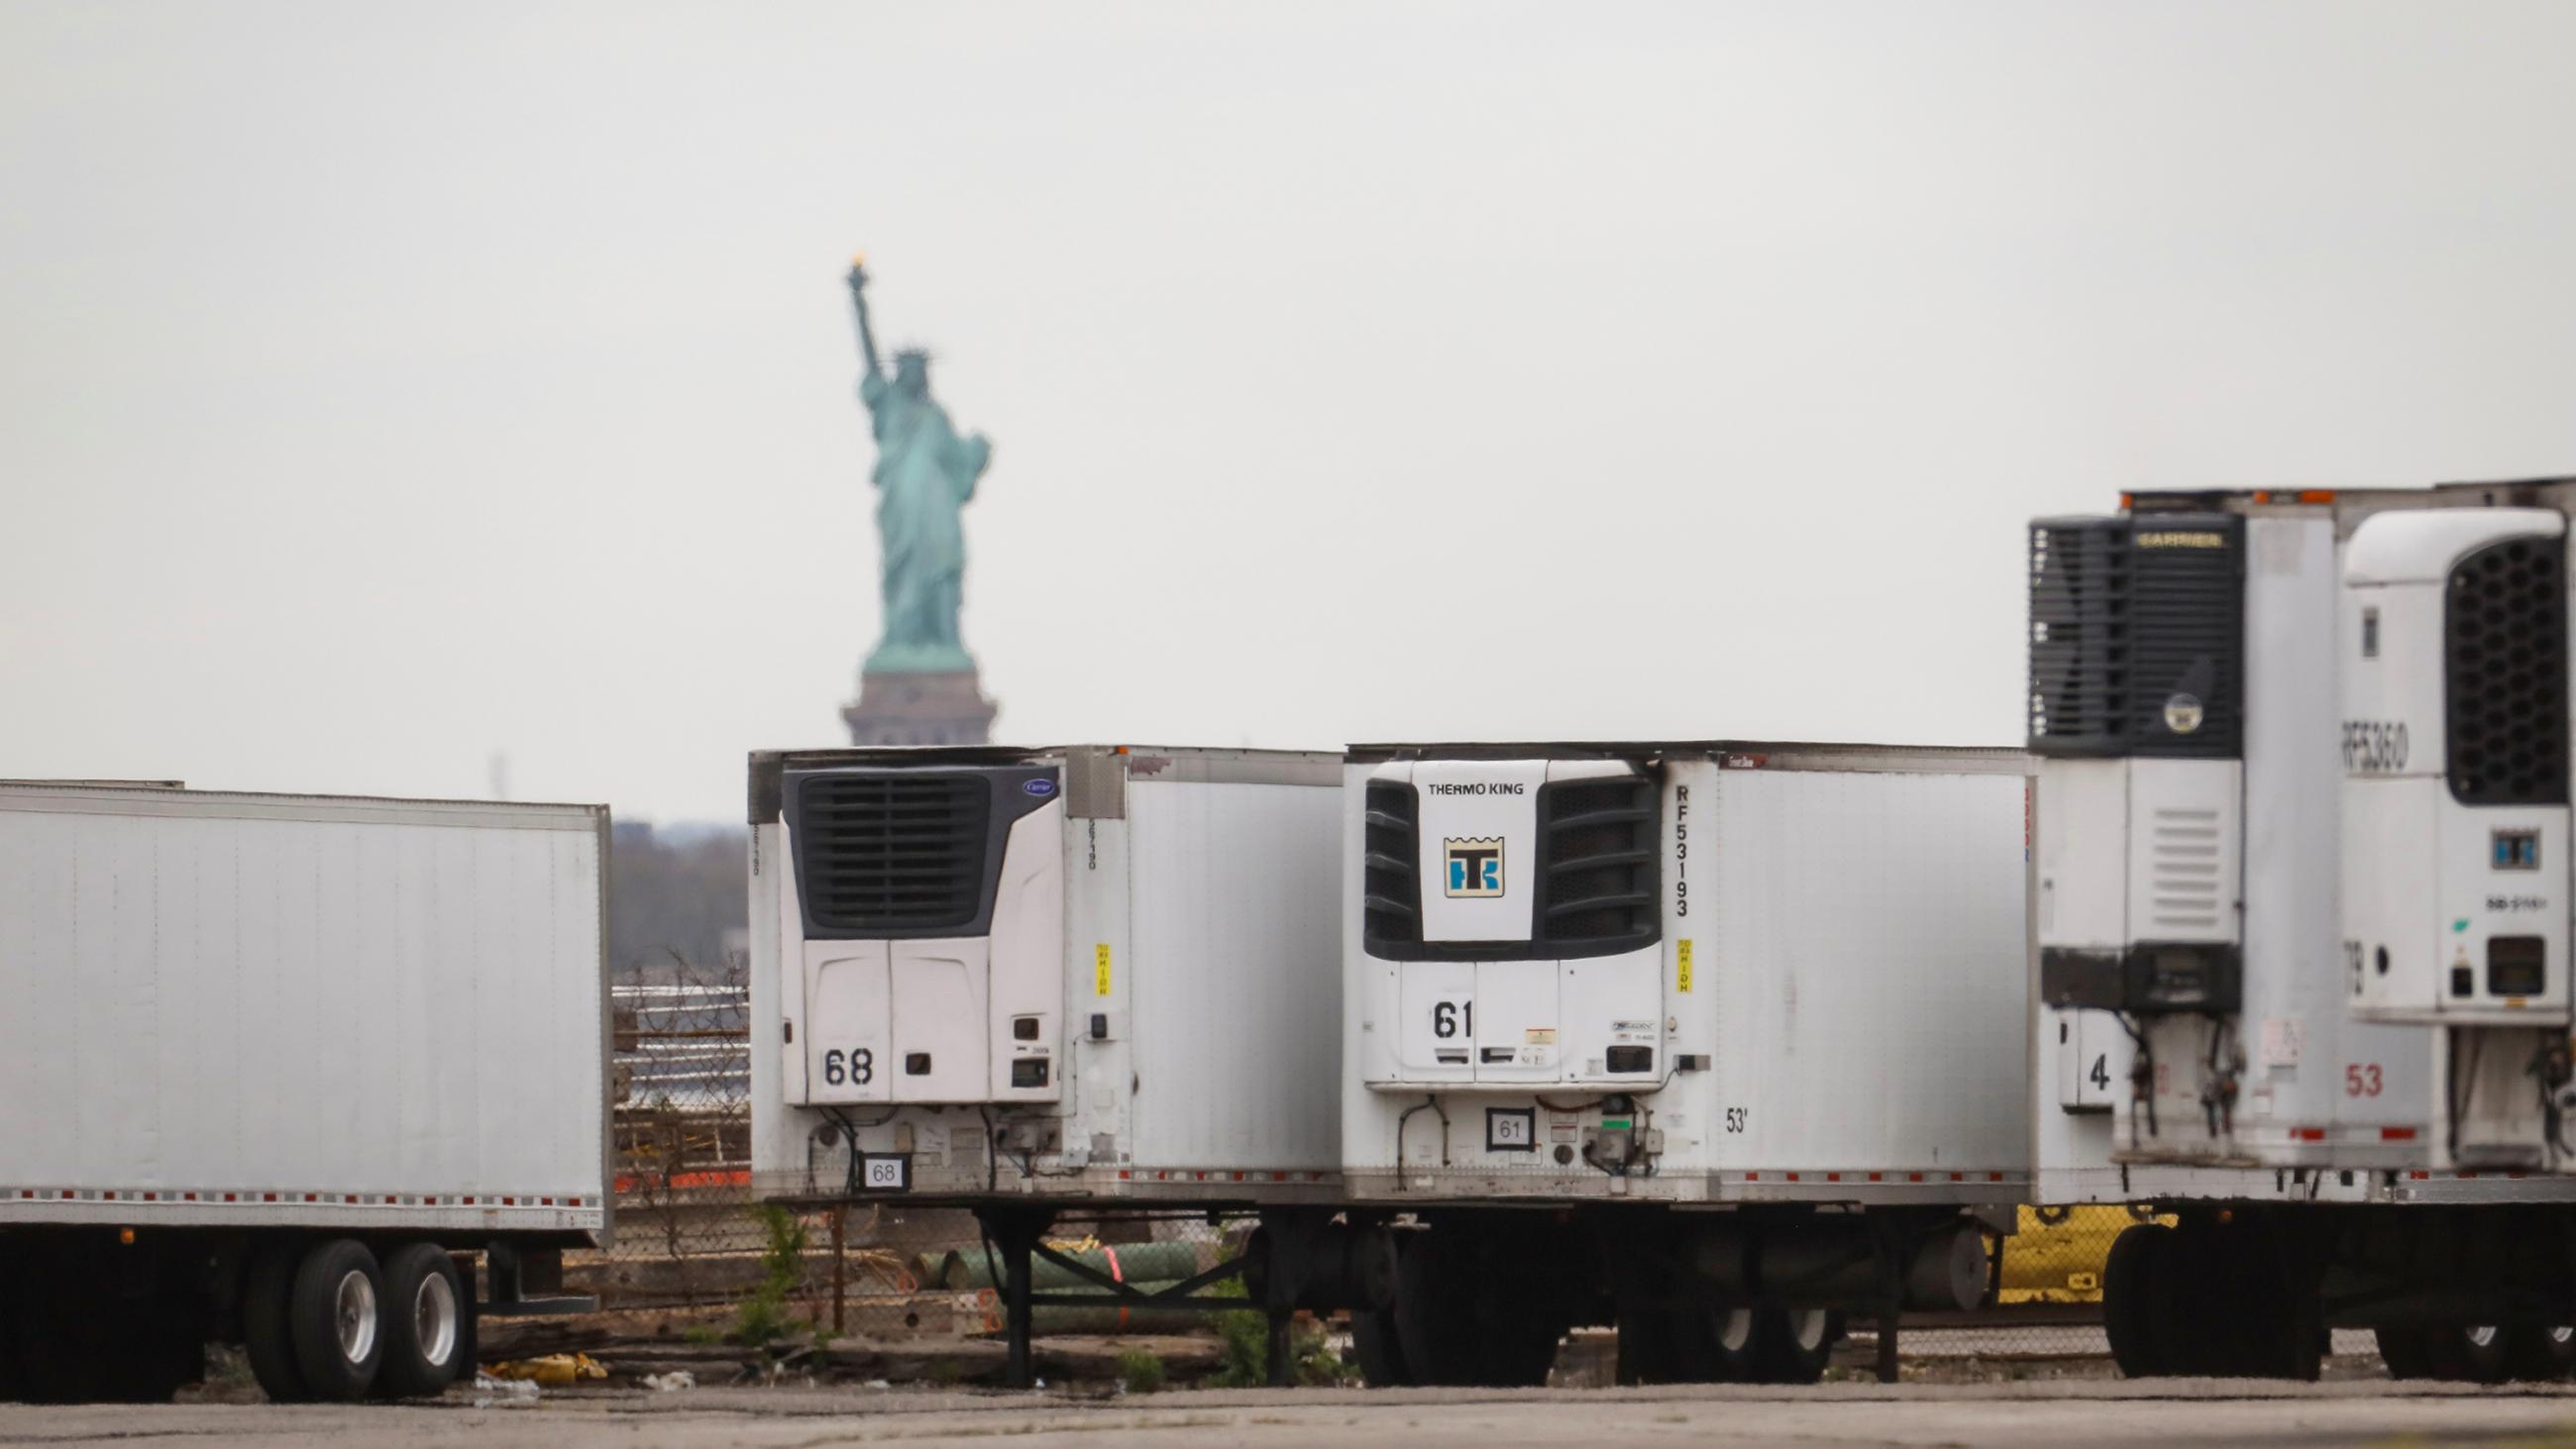 The photo shows several large 18-wheeler trucks parked with the Statue of Liberty in the background. 